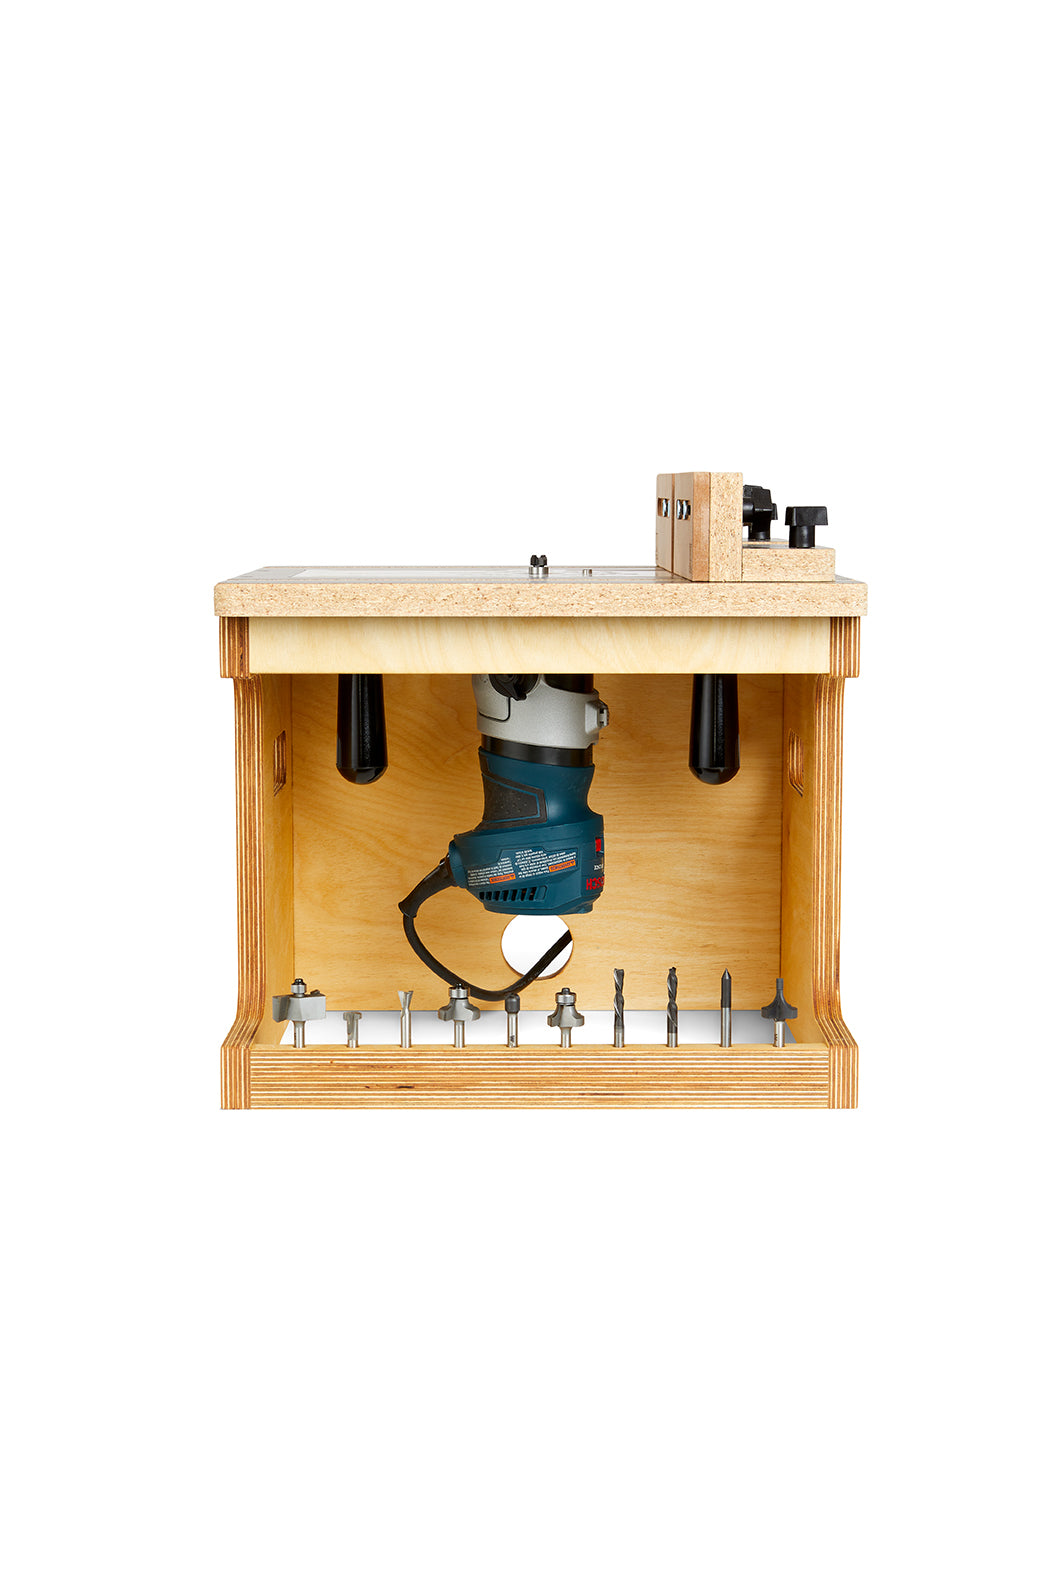 wood router table